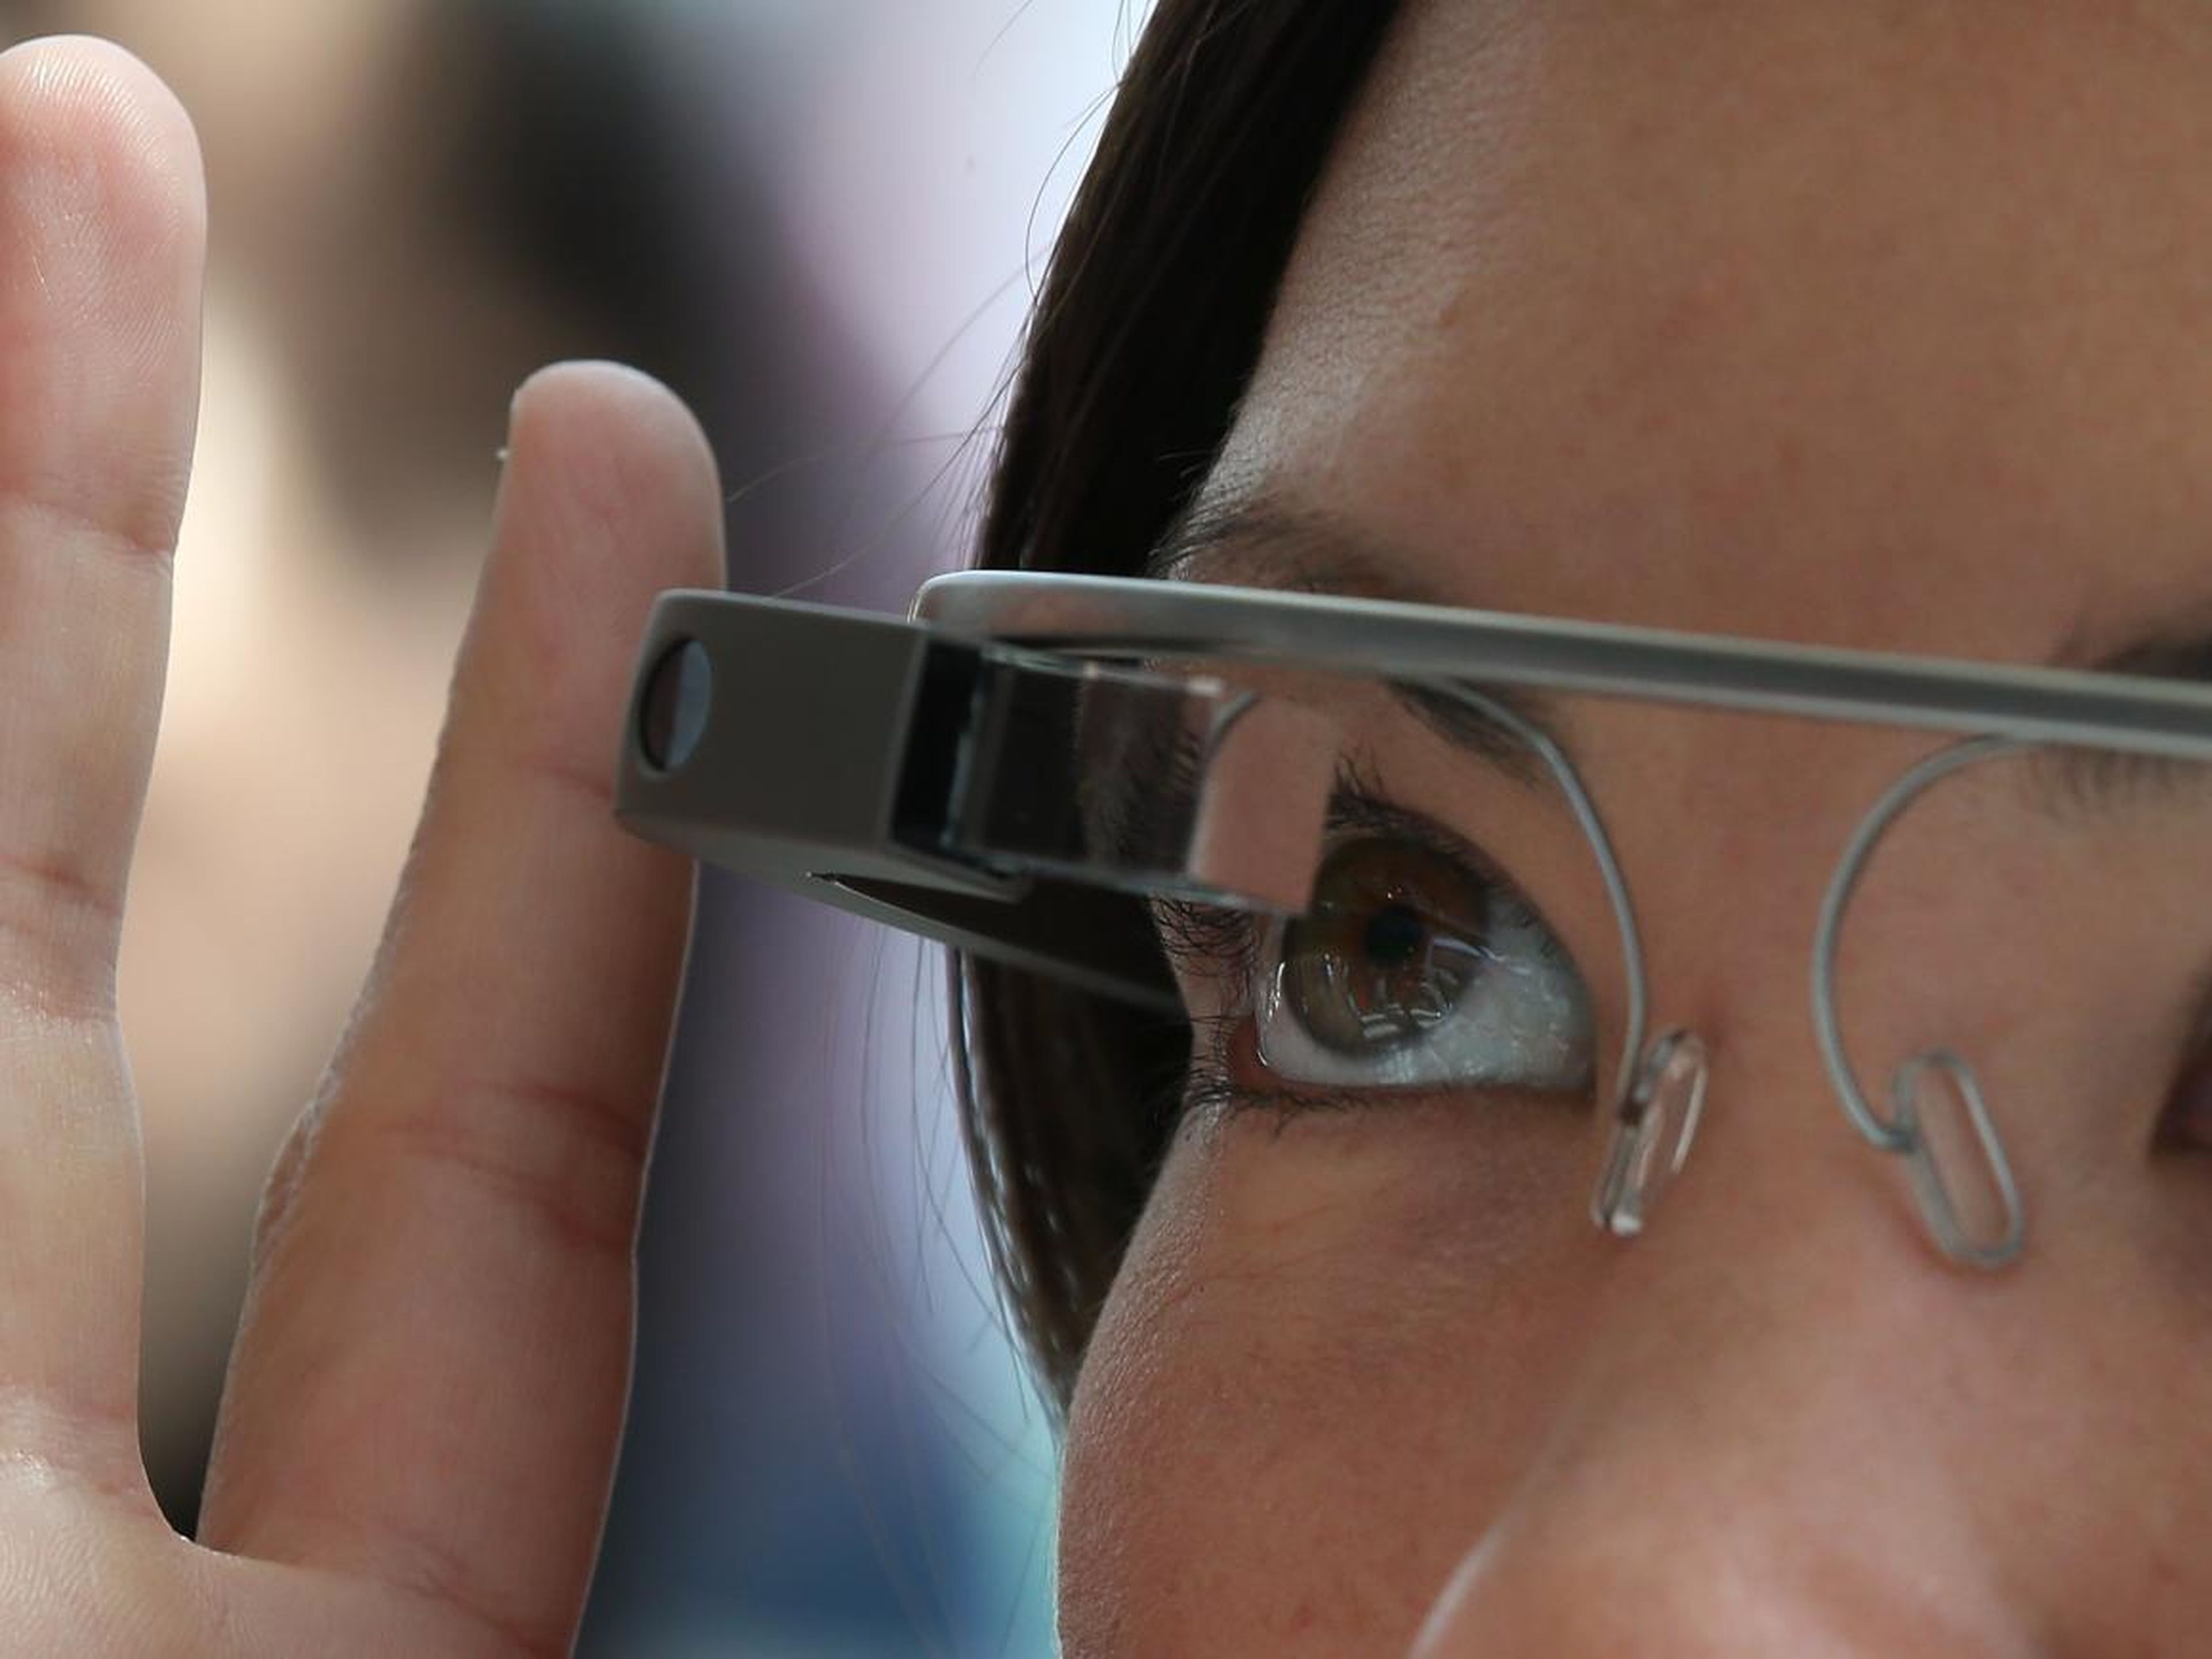 Google first unveiled Glass in dramatic fashion in 2012, but the device never made it to the masses. Glass came with a high price tag, software issues, potential privacy problems, and it generally looked too nerdy. Google ended